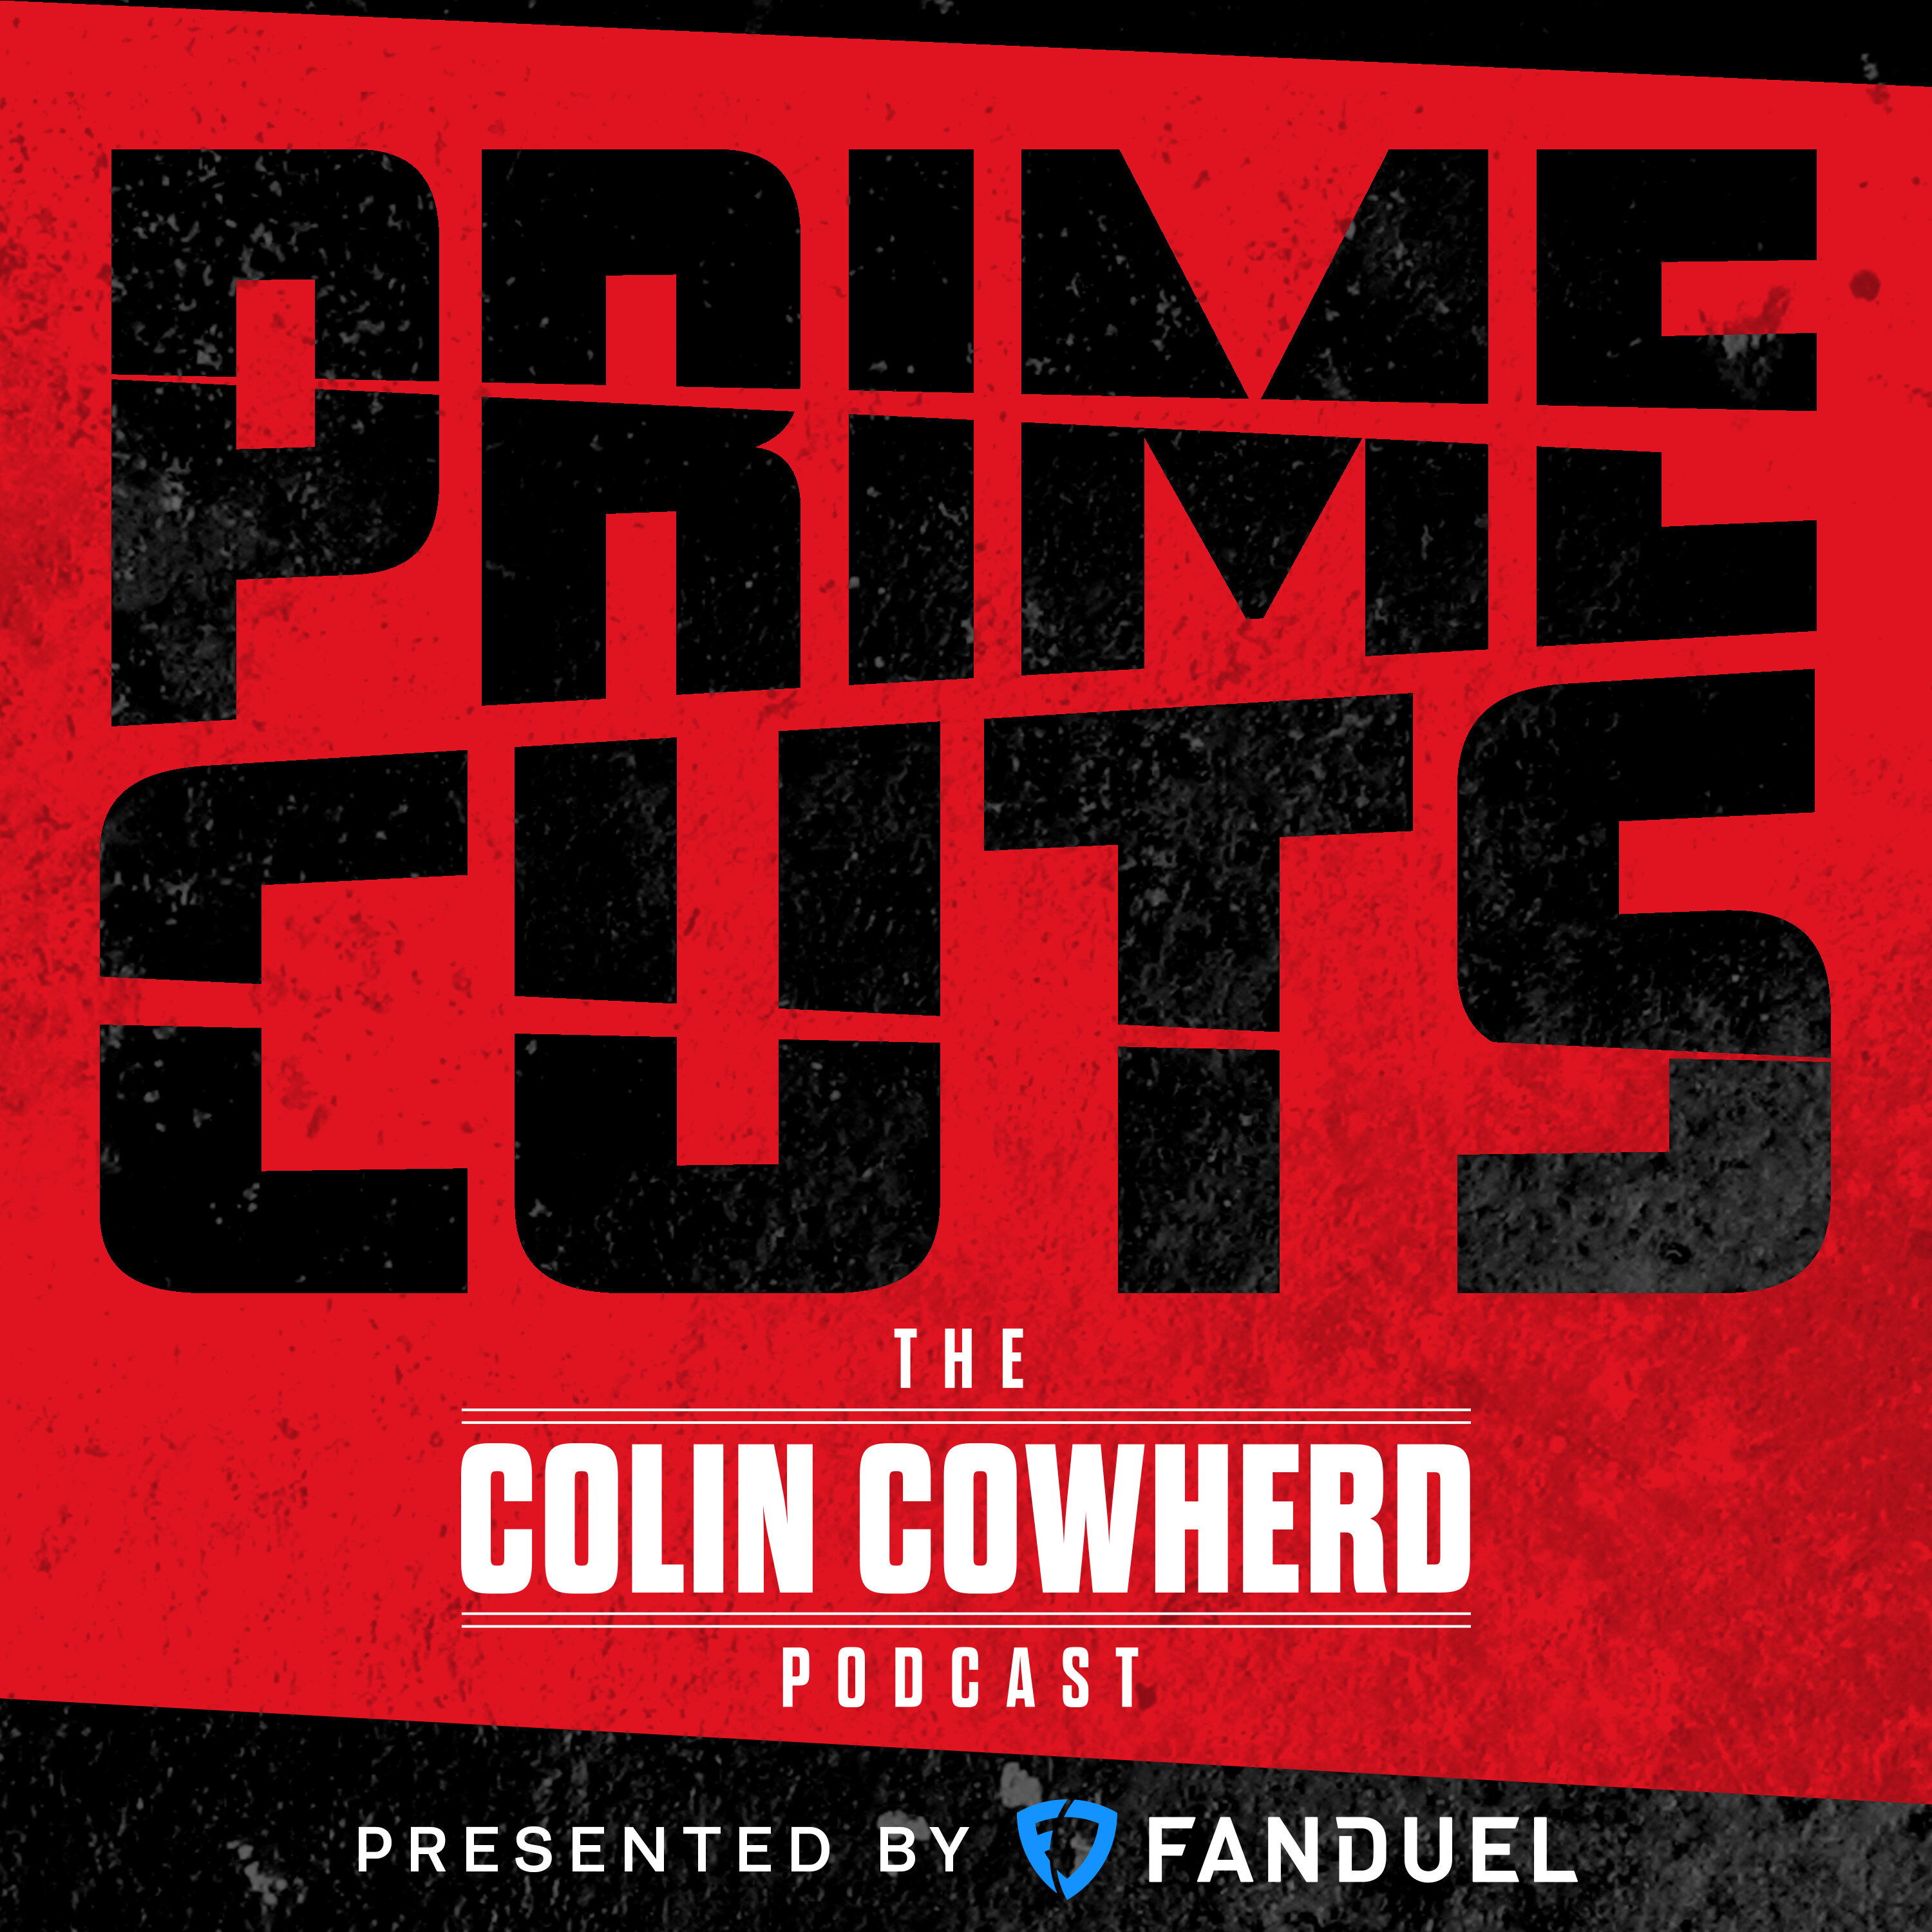 Colin Cowherd Podcast Prime Cuts - Carson Wentz on Colts Divorce, Mike Vrabel on AJ Brown Trade, Suns/CP3 Collapse with Ric Bucher